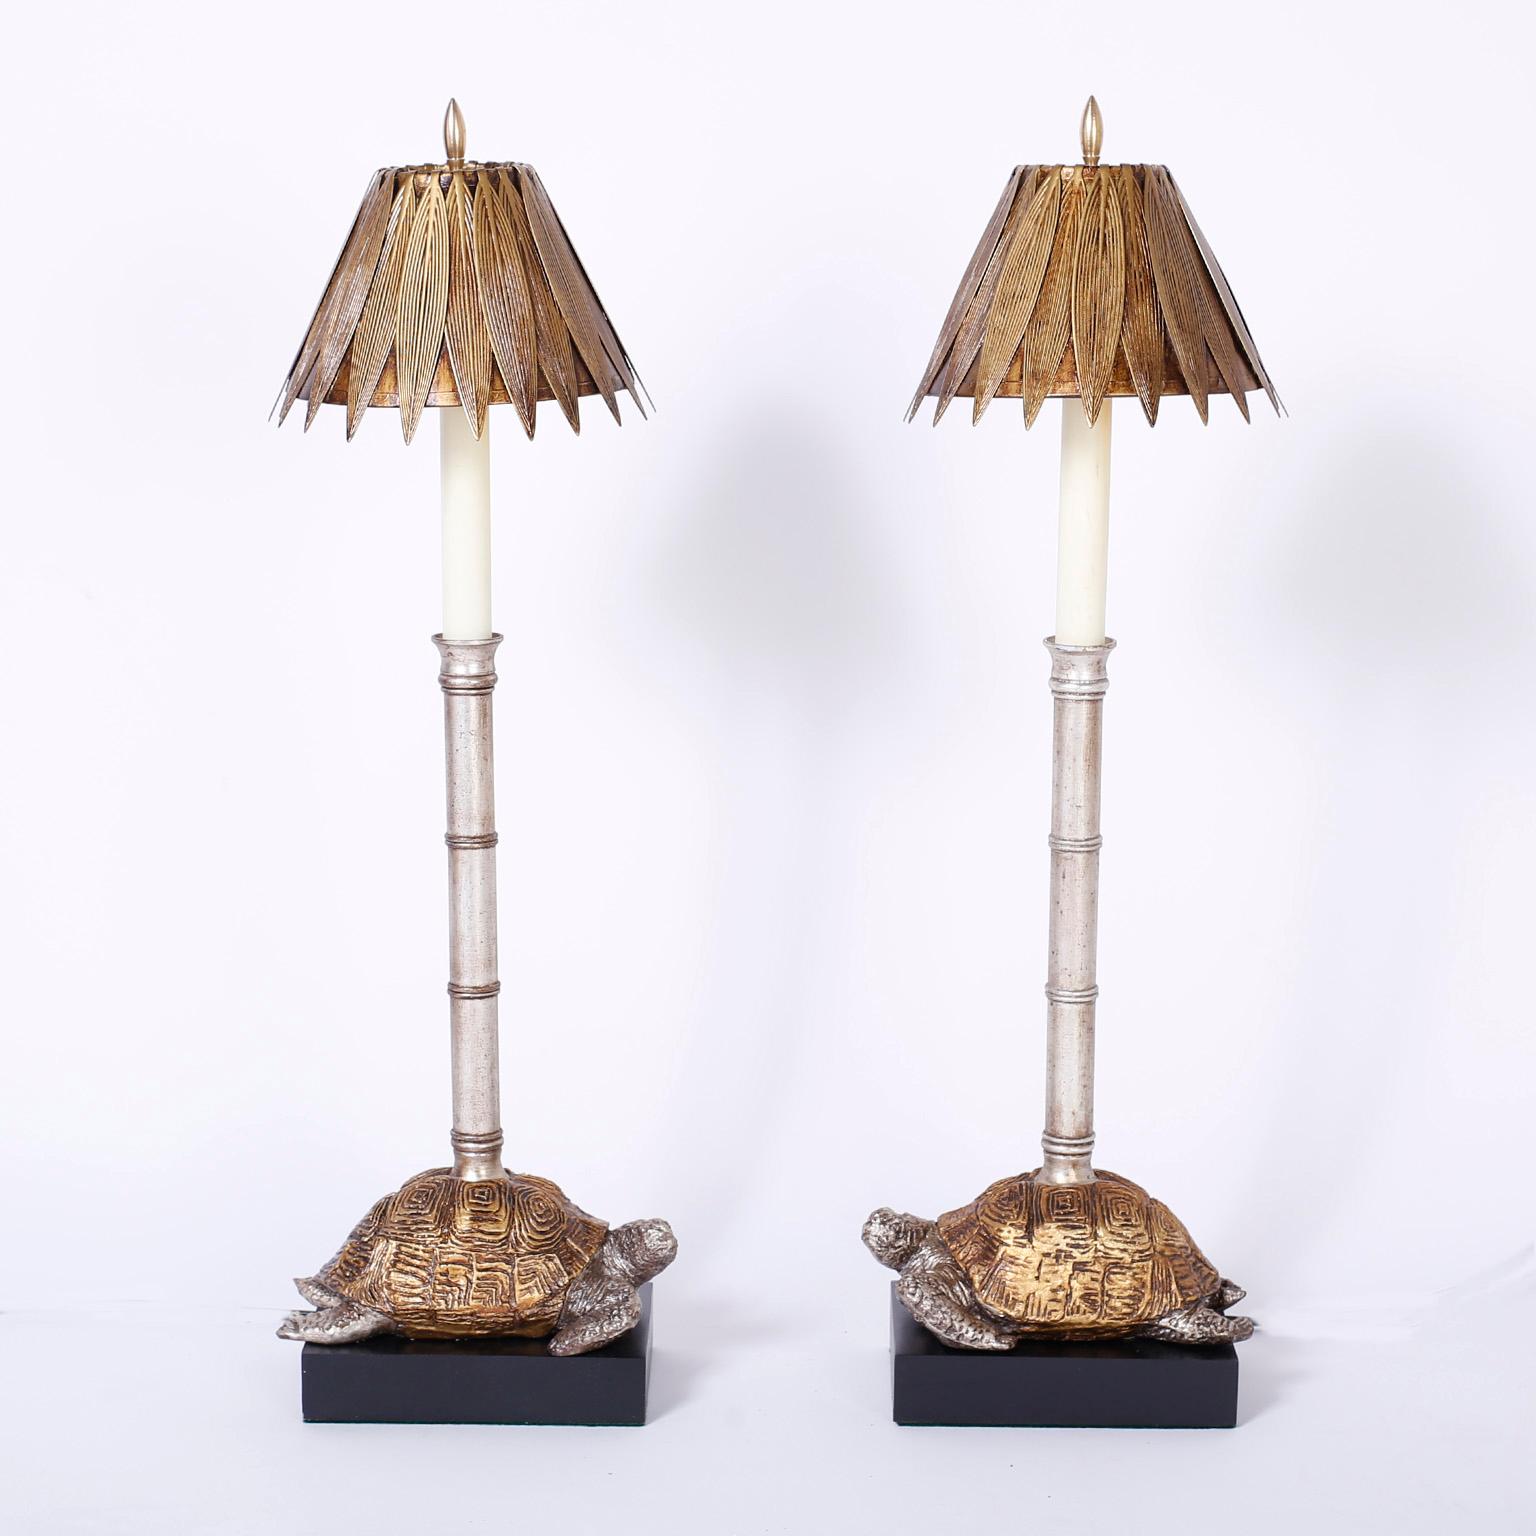 Elegant pair of table lamps with stylized brass leaf shades over faux bamboo silver leaf candlestick shafts on composition silver and gold turtles set on ebonized wood bases.